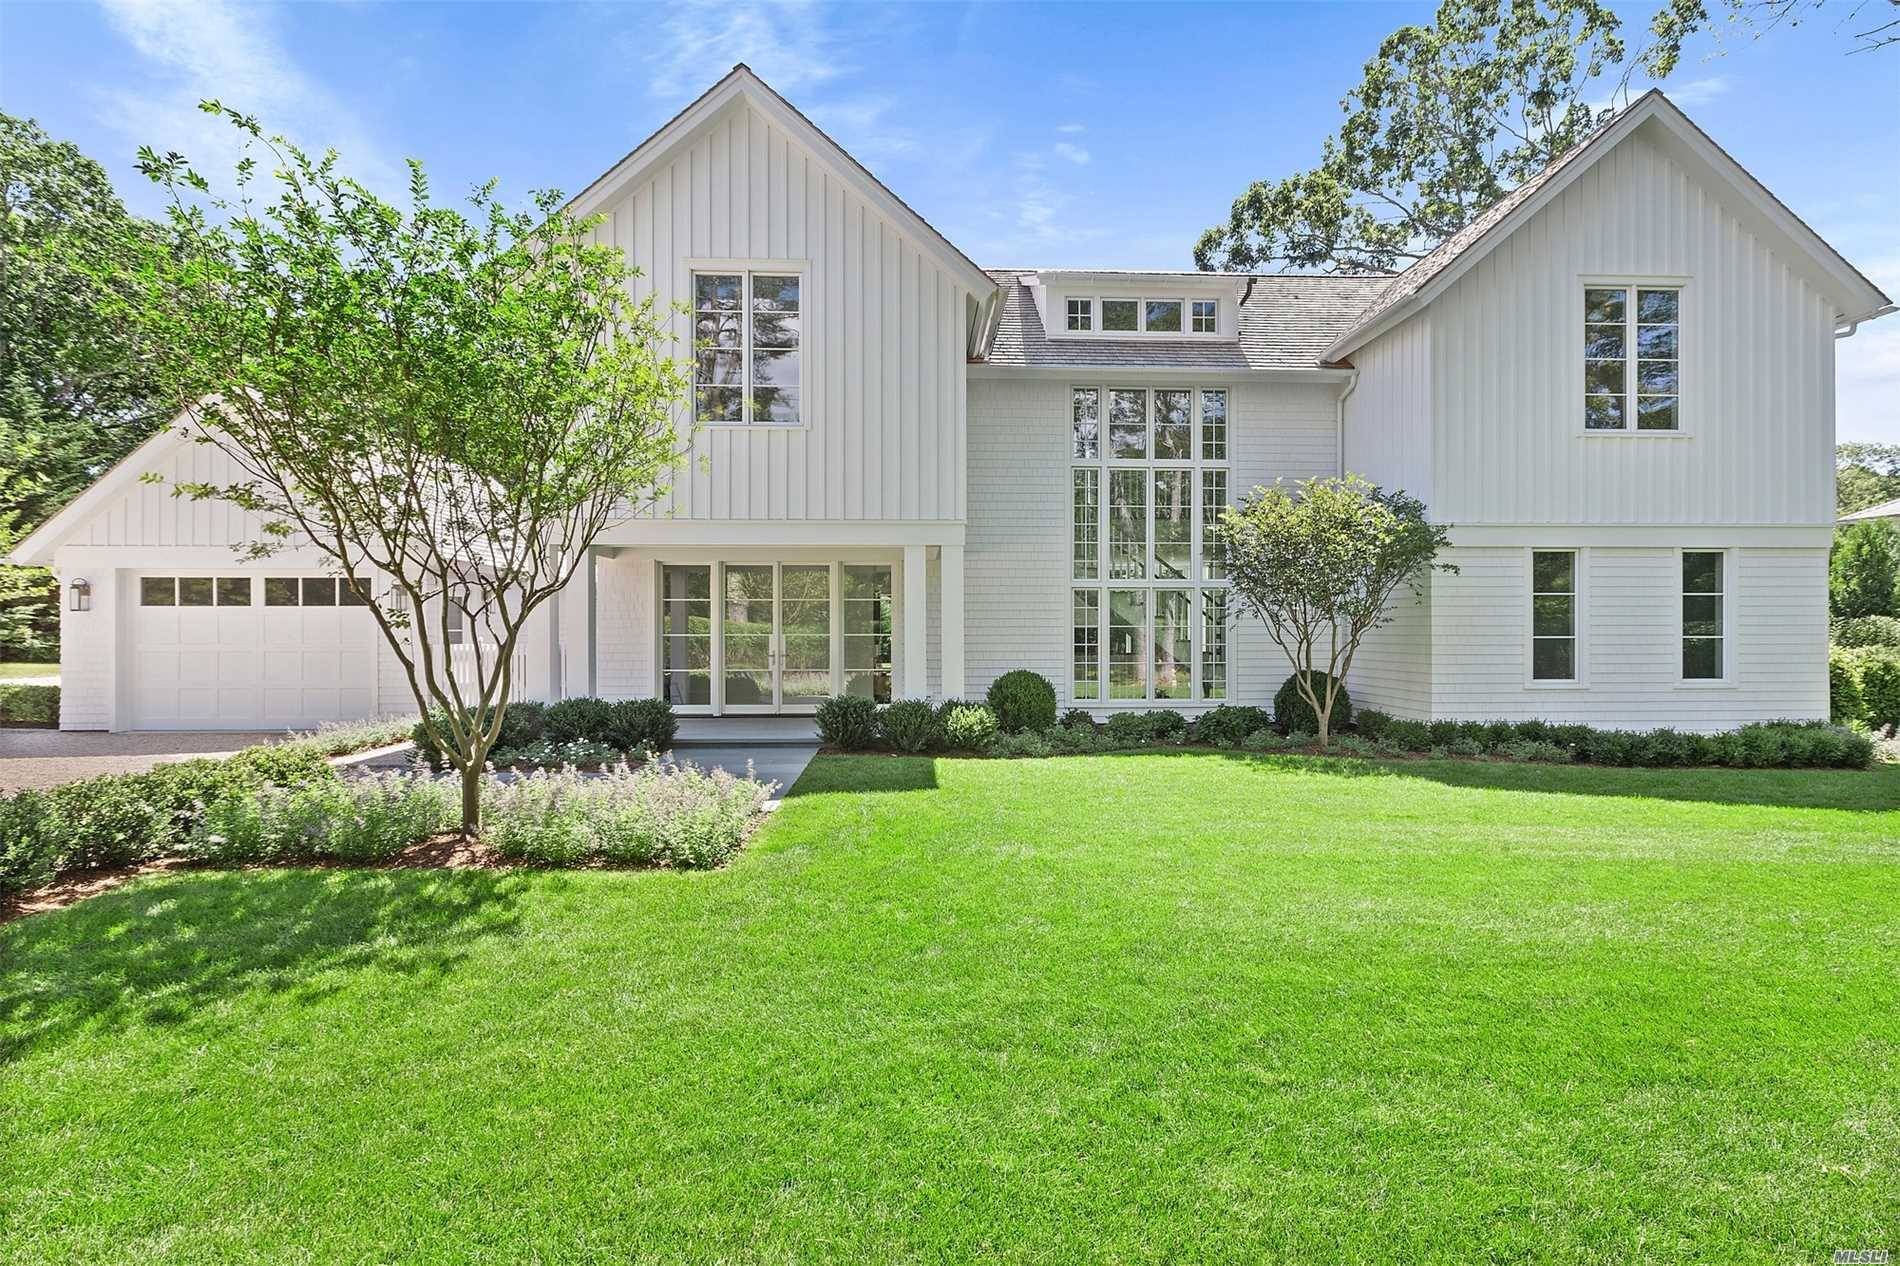 This stunning south of the highway, new construction, is nestled in the Georgica section of East Hampton Village.